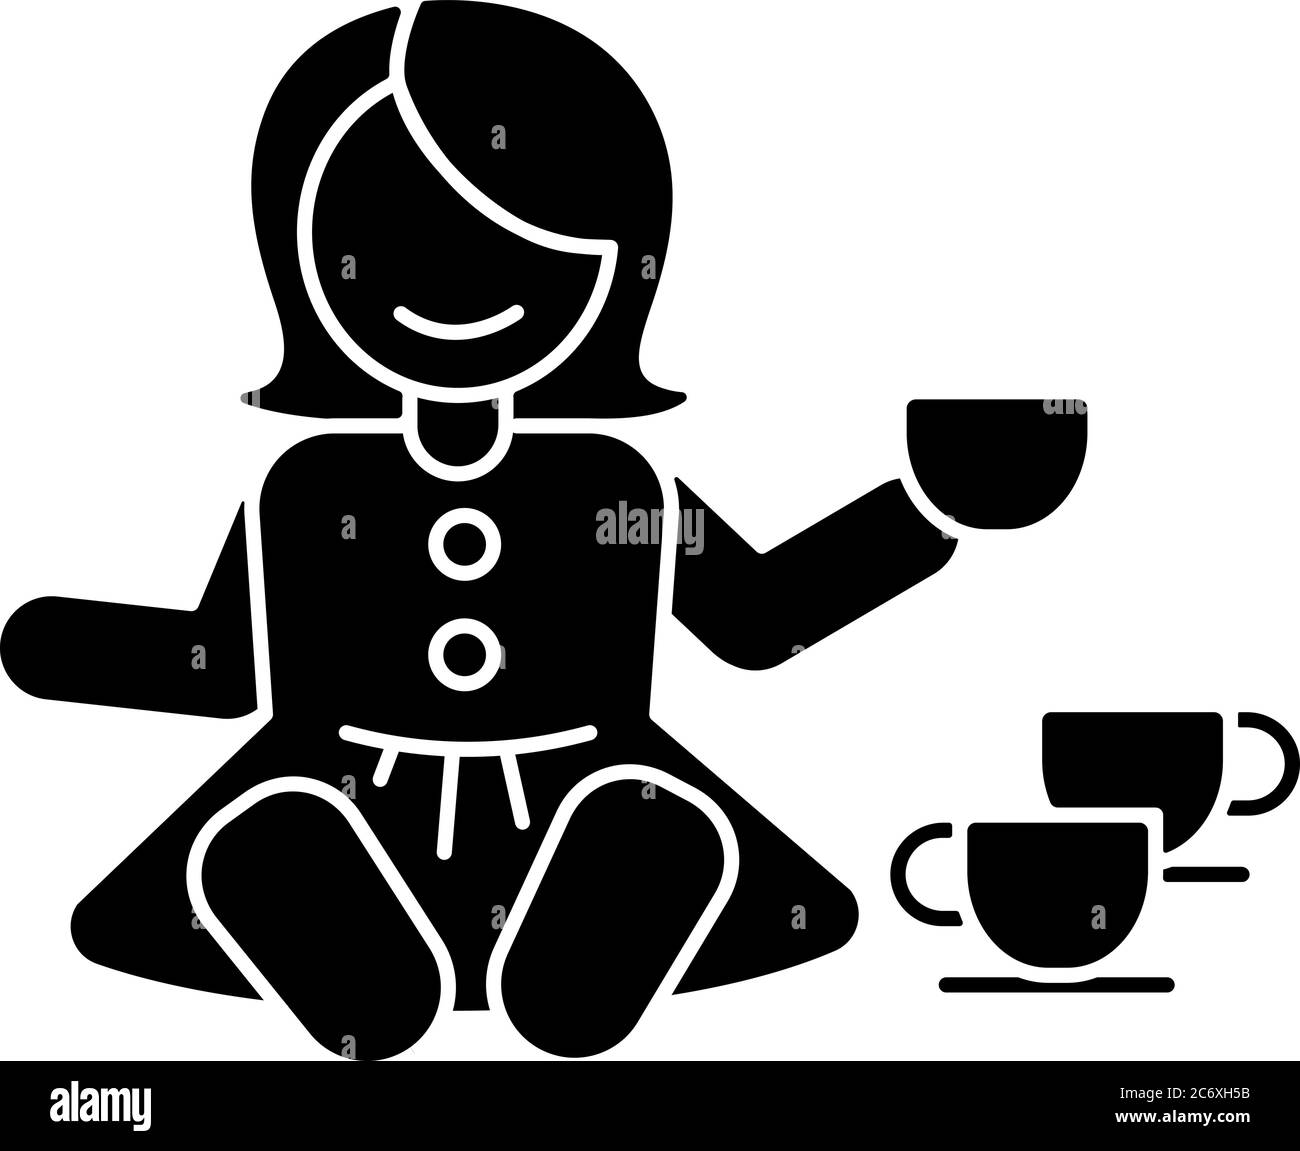 Pretend kitchenware black glyph icon. Baby doll with tea set. Toys for playing pretend game with children. Social skills development. Silhouette symbo Stock Vector